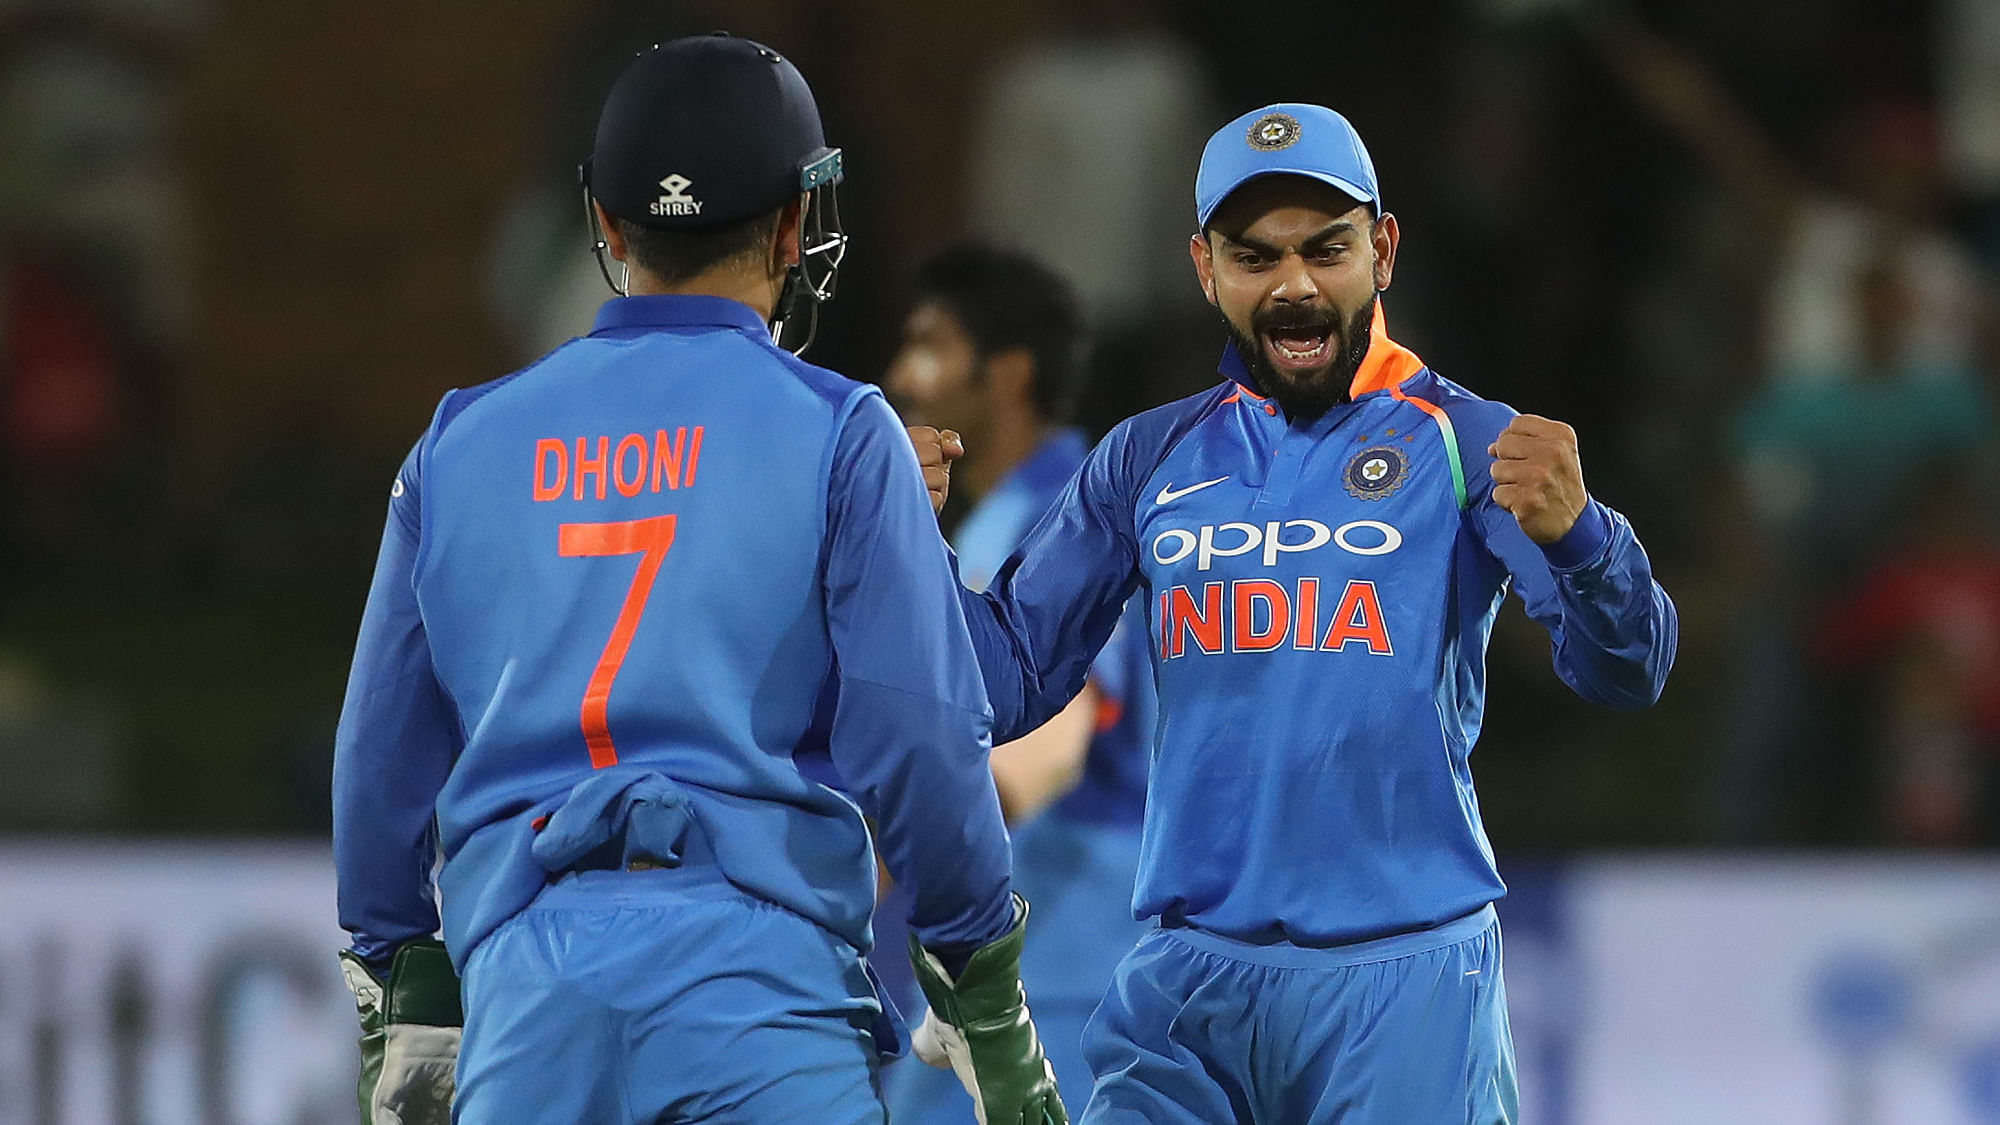 India created history, beating South Africa by 73 runs in the fifth ODI in South Africa to win their first-ever series in the country. 